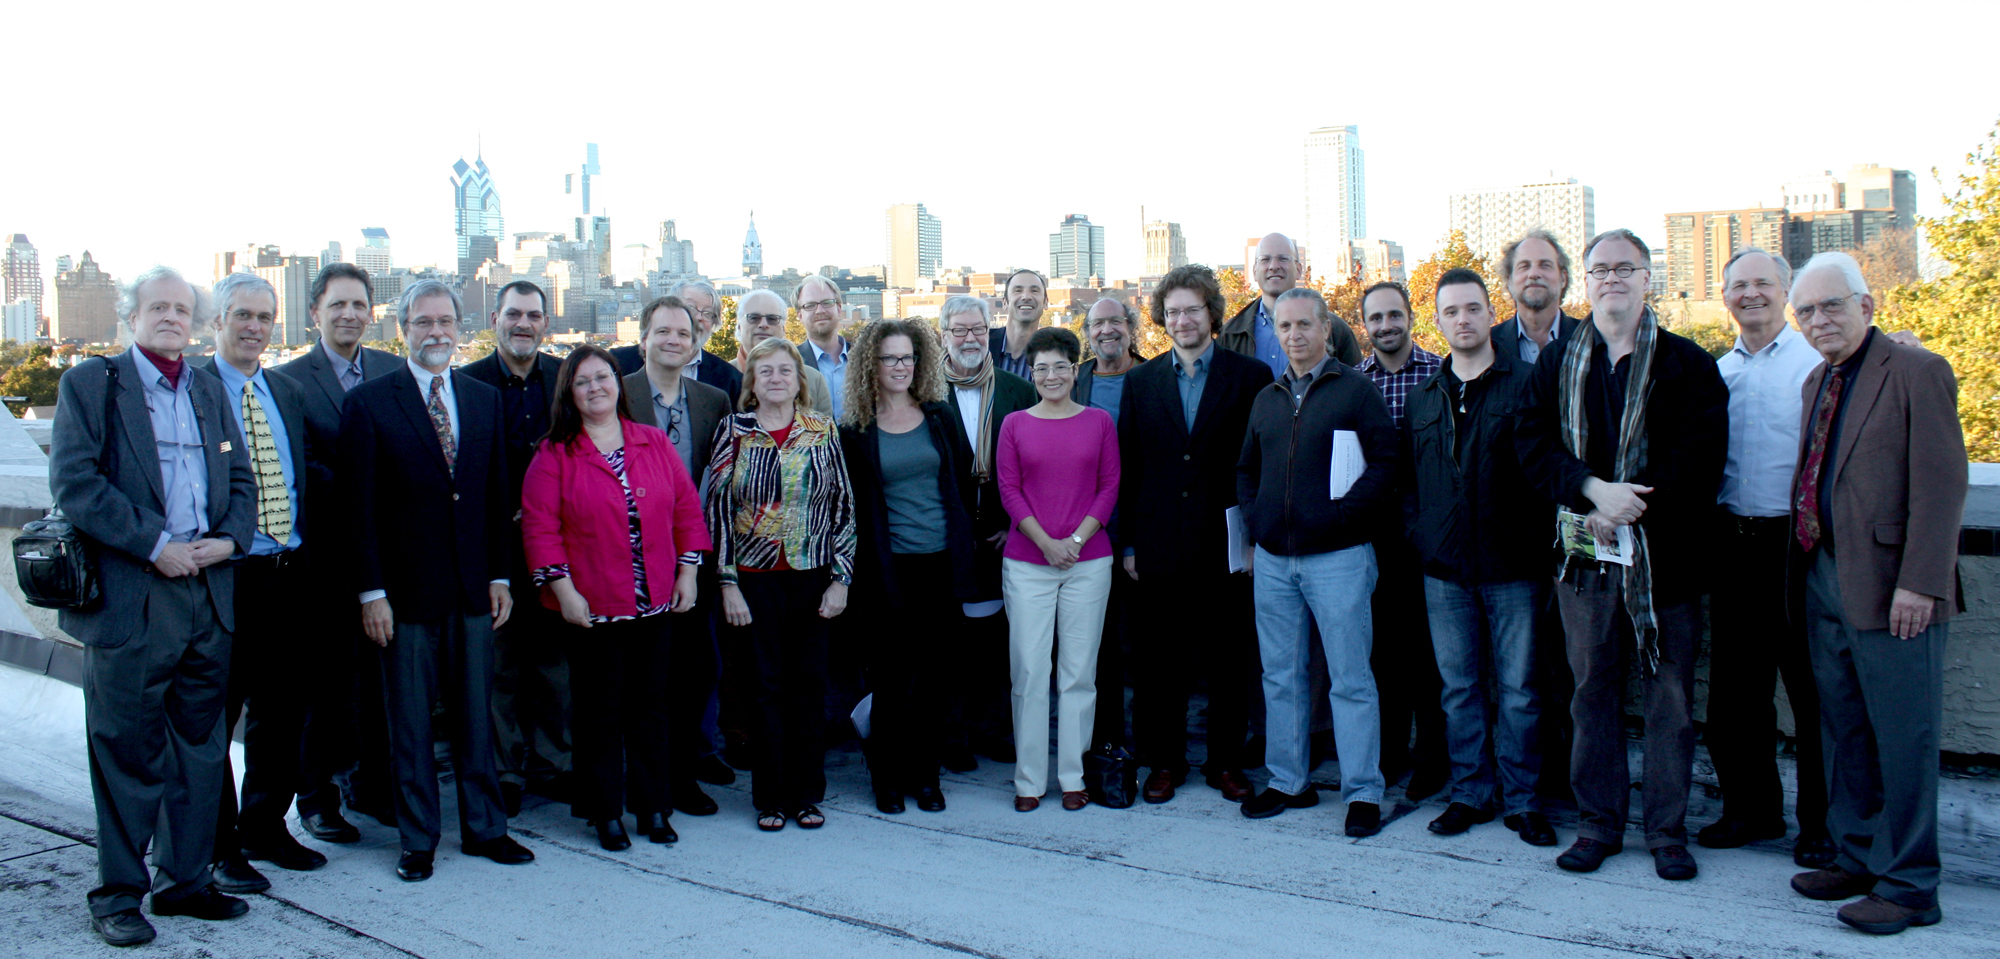 An outdoor photo of the 30 composers that NNM commissioned for its 30th Anniversary in 2014 (photo by Annie Sarachan)